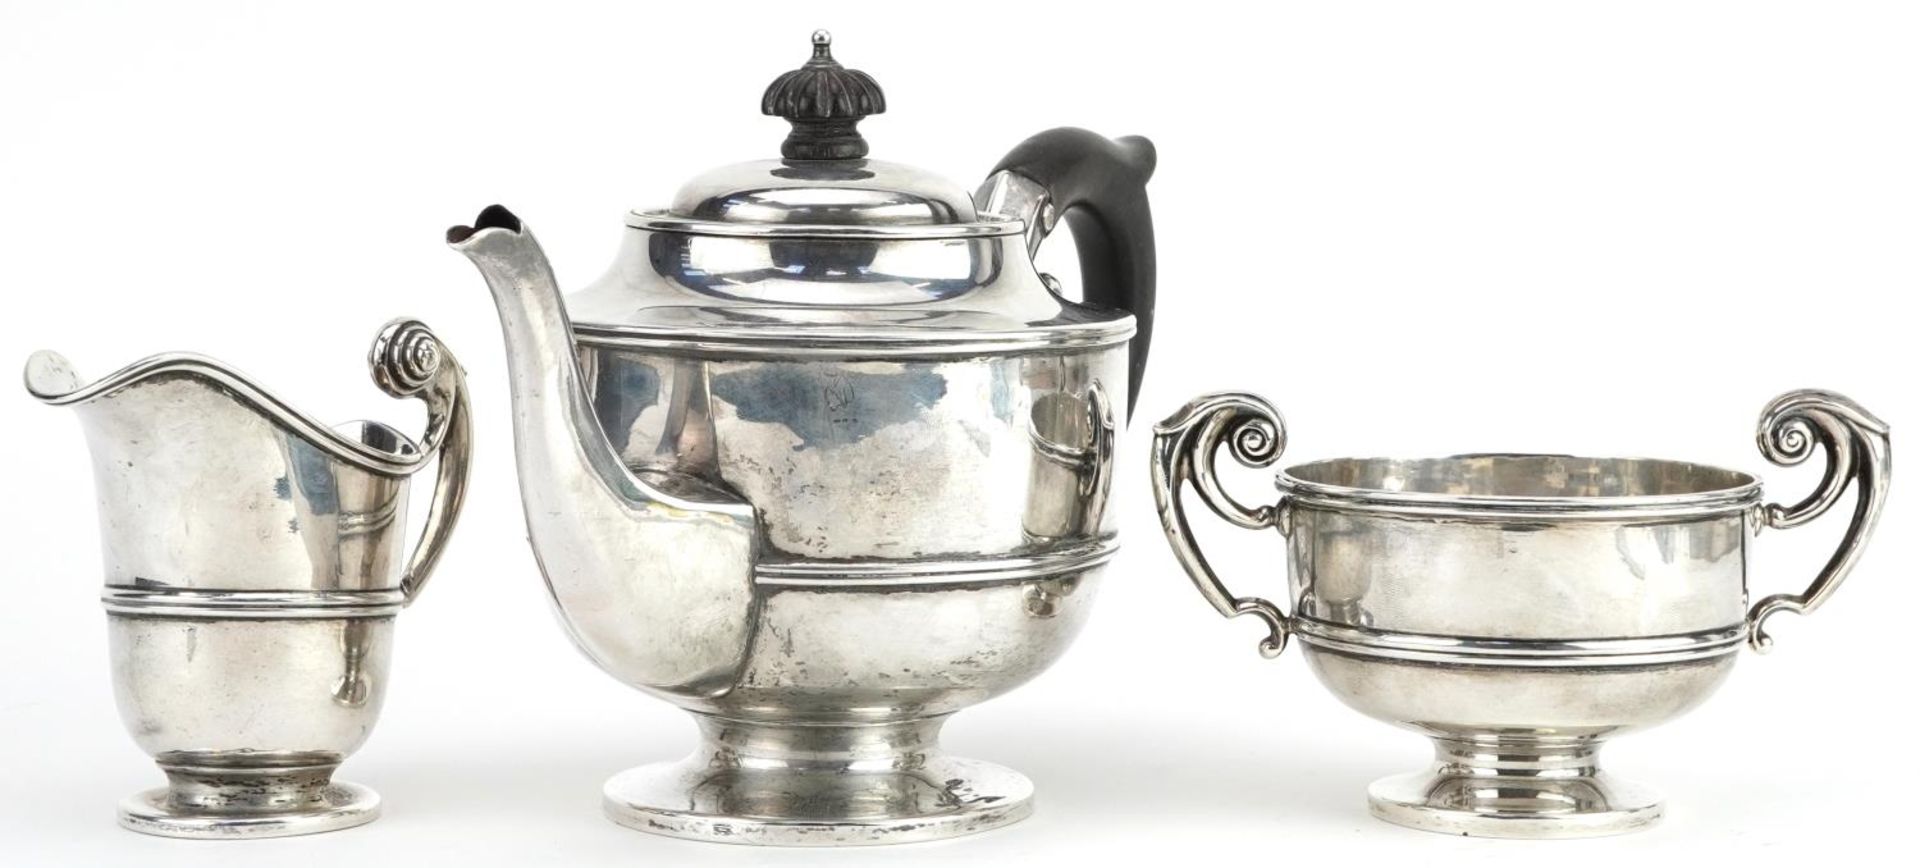 George Nathan & Ridley Hayes, Edwardian silver three piece tea service, the teapot with ebonised